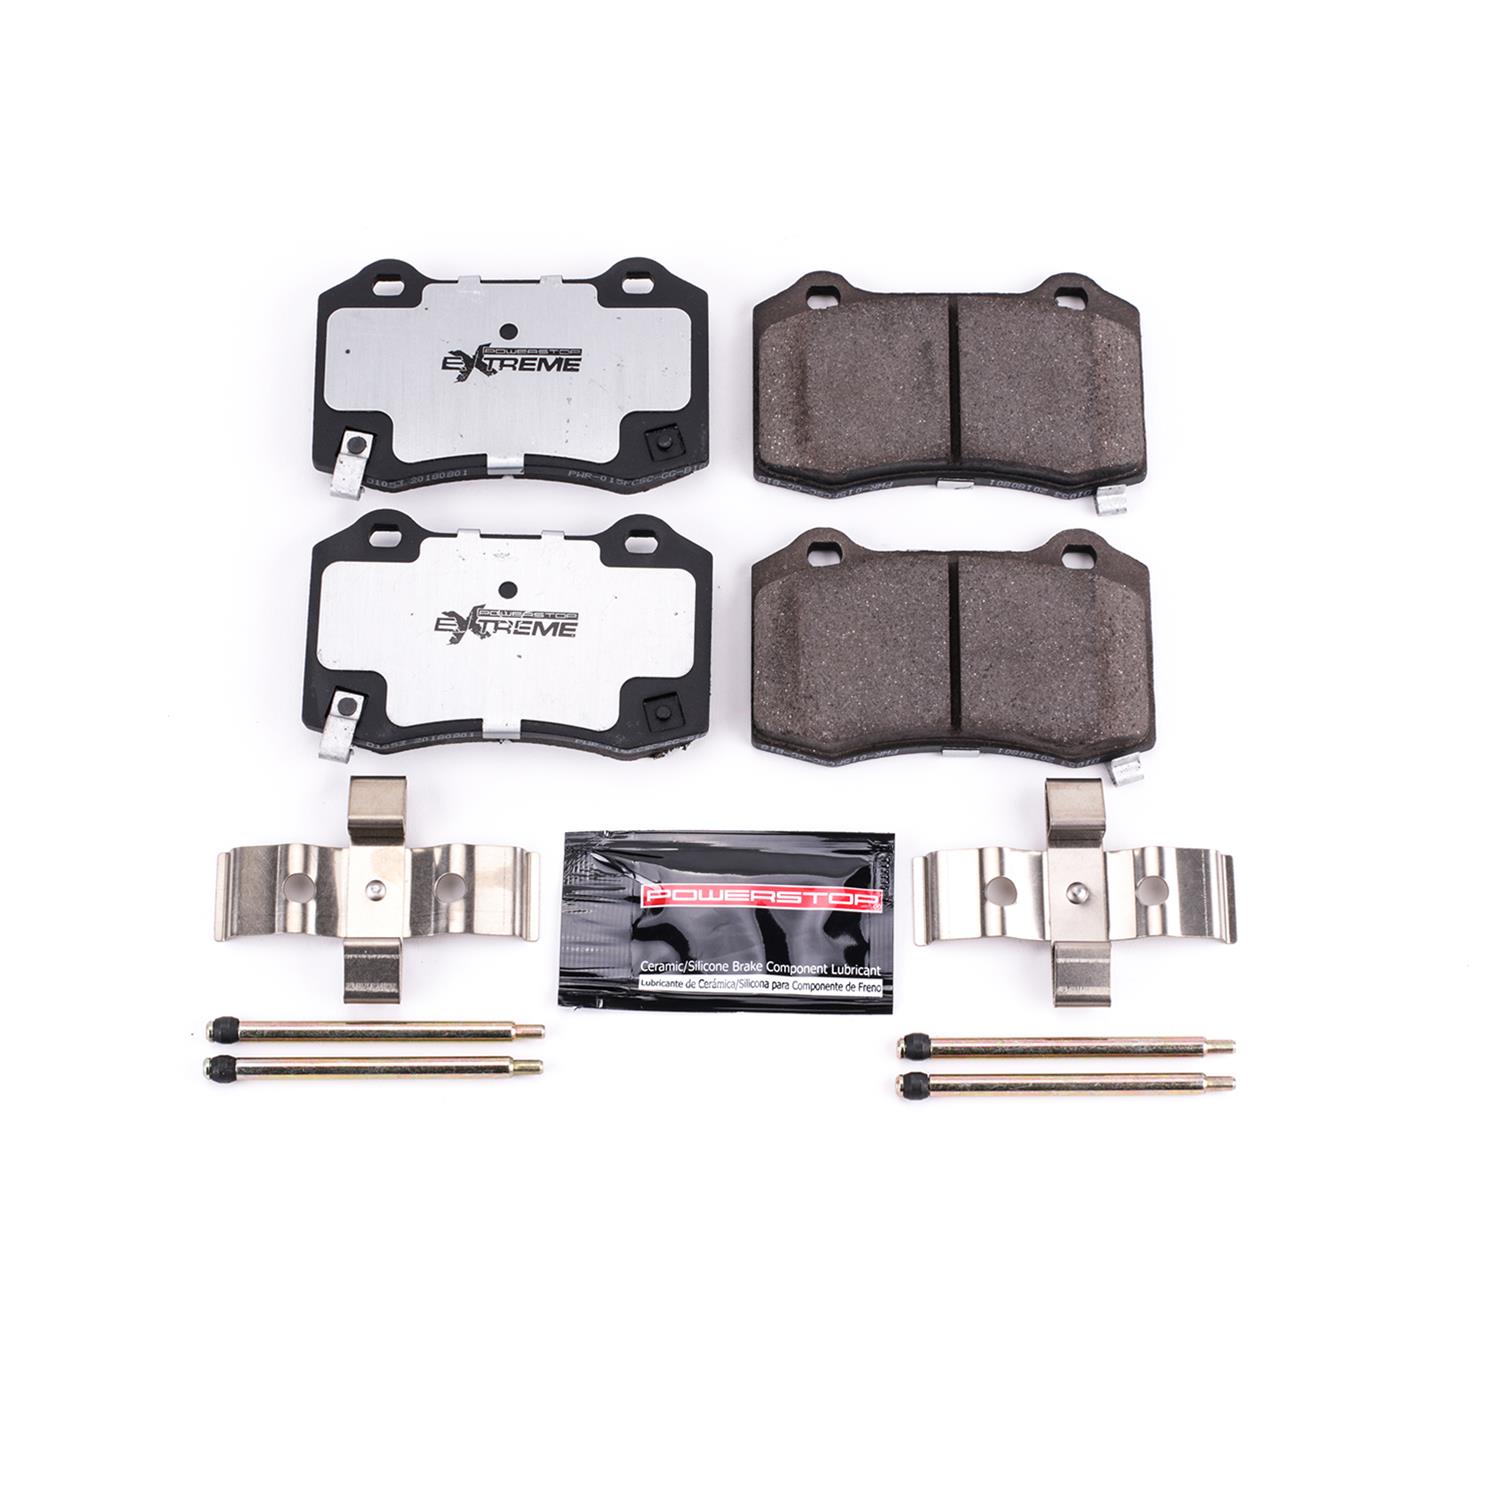 Z26-1549 Powerstop 2-Wheel Set Brake Pad Sets Front New for Audi A6 Quattro A8